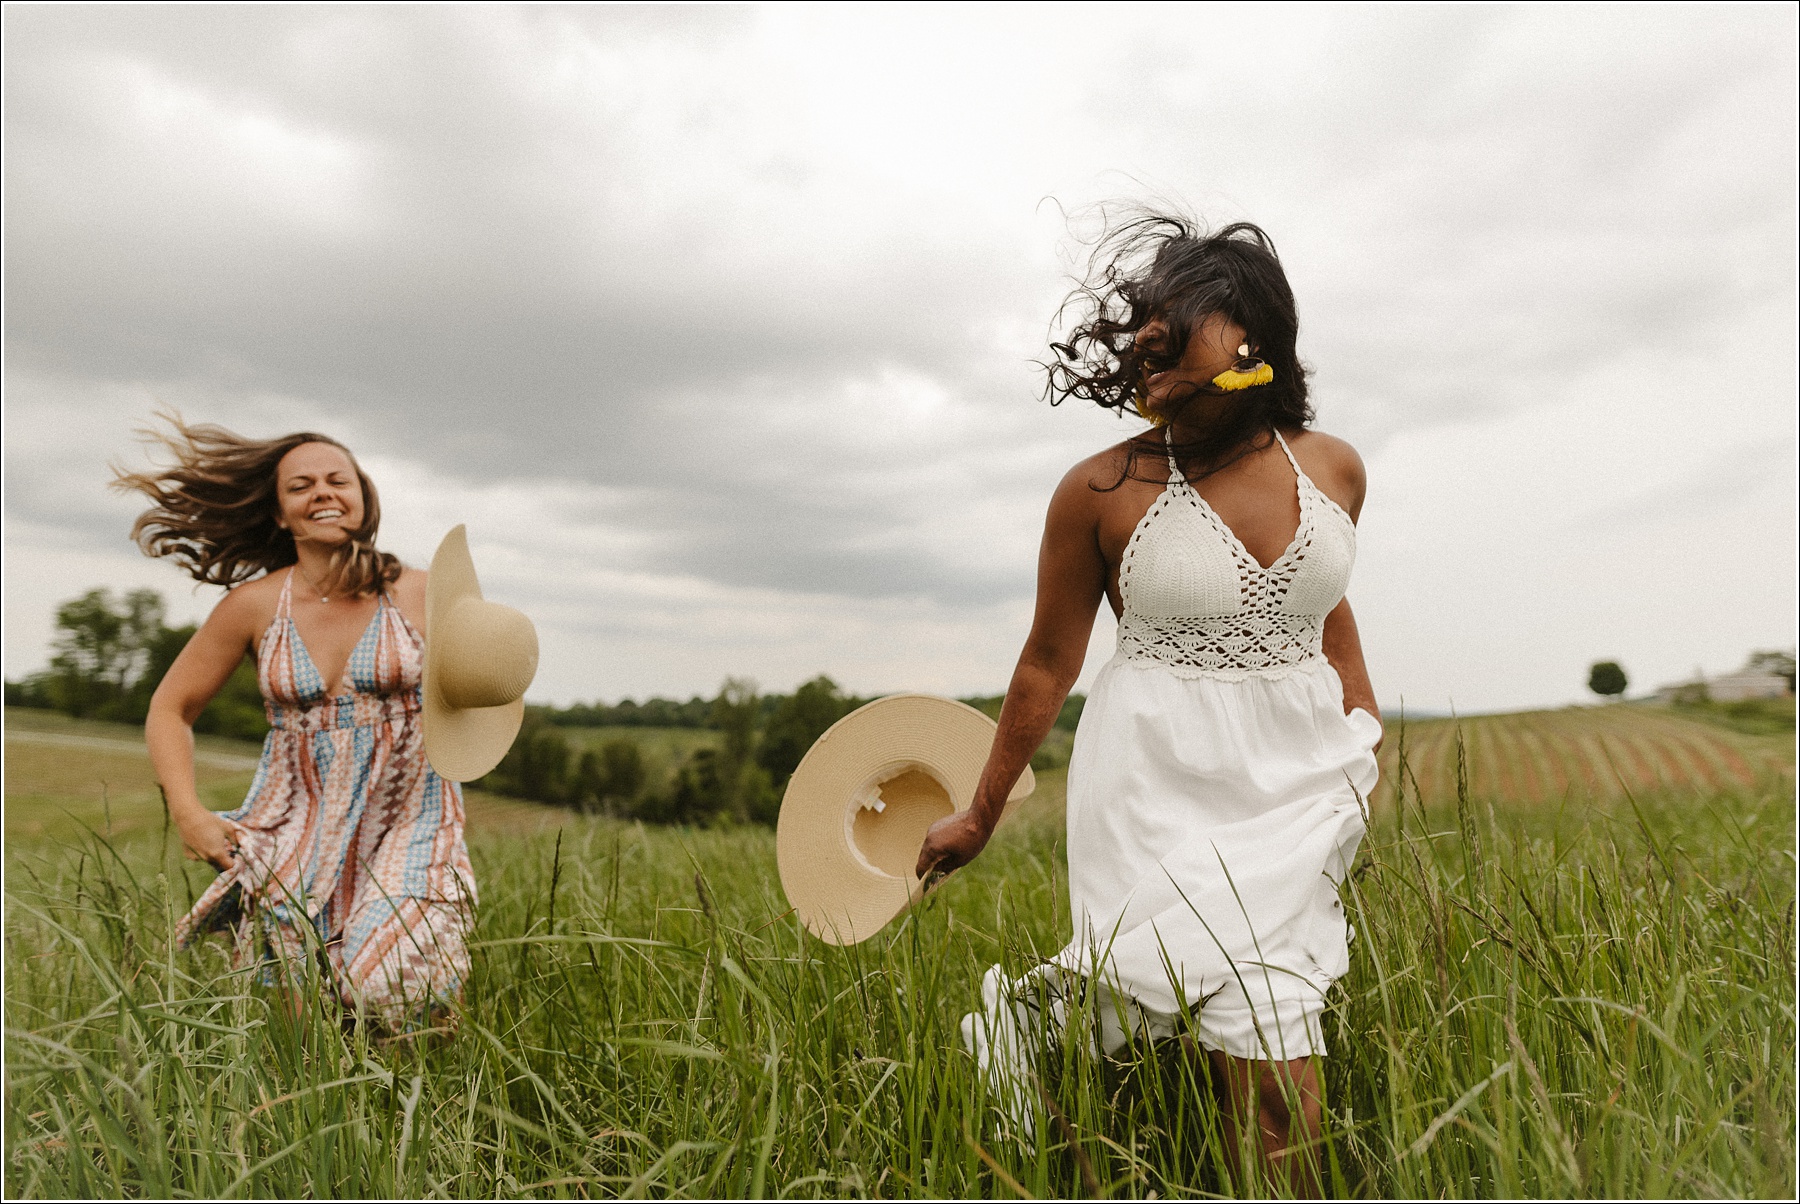 best friends run in sundresses in field at linganore winery with stormy sky